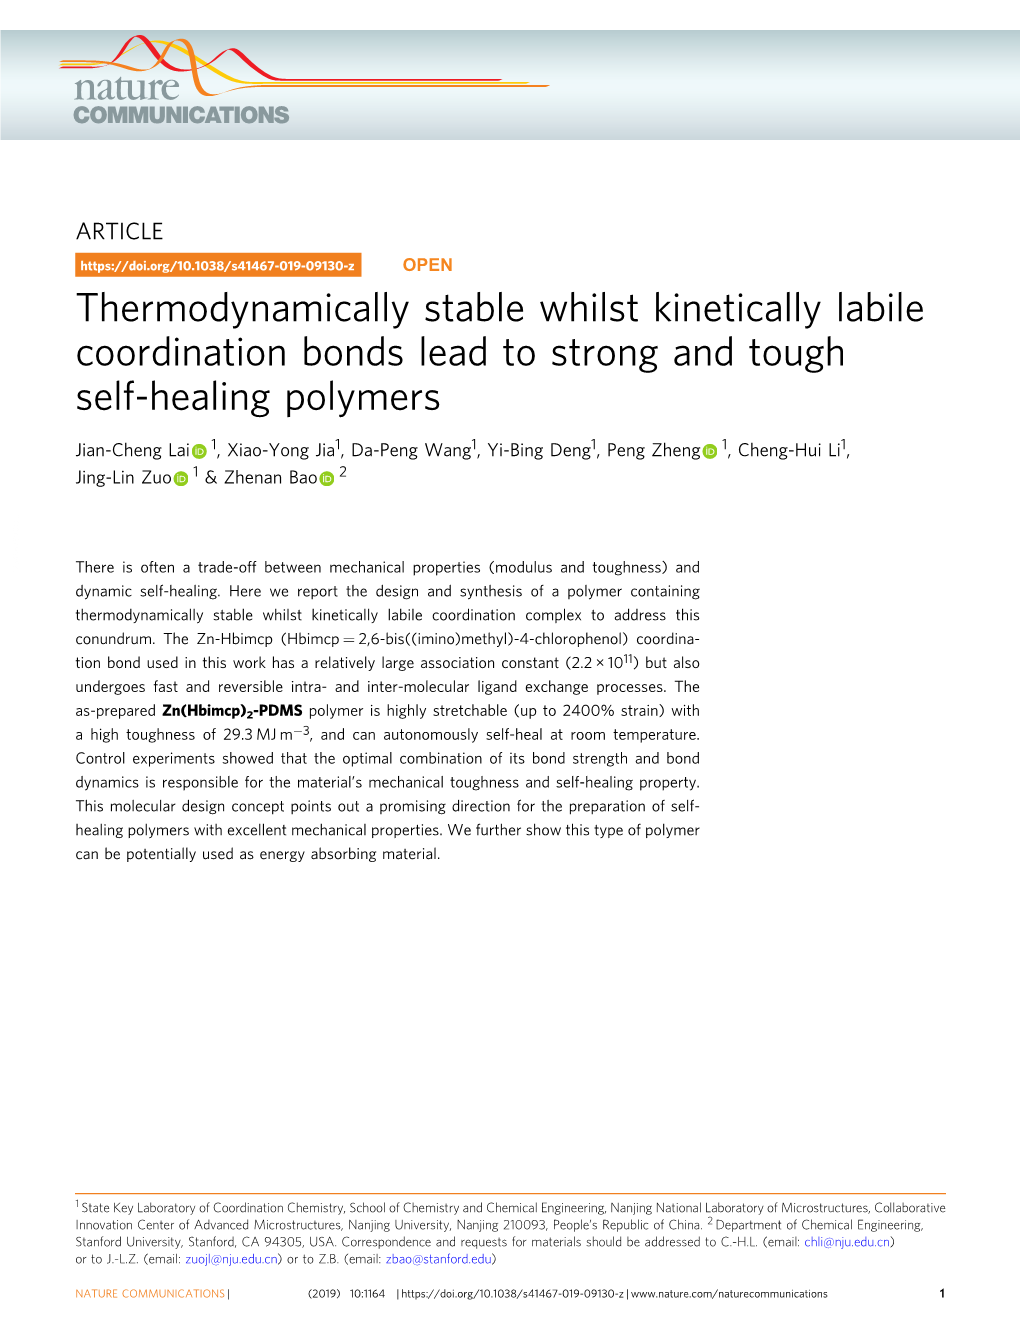 Thermodynamically Stable Whilst Kinetically Labile Coordination Bonds Lead to Strong and Tough Self-Healing Polymers